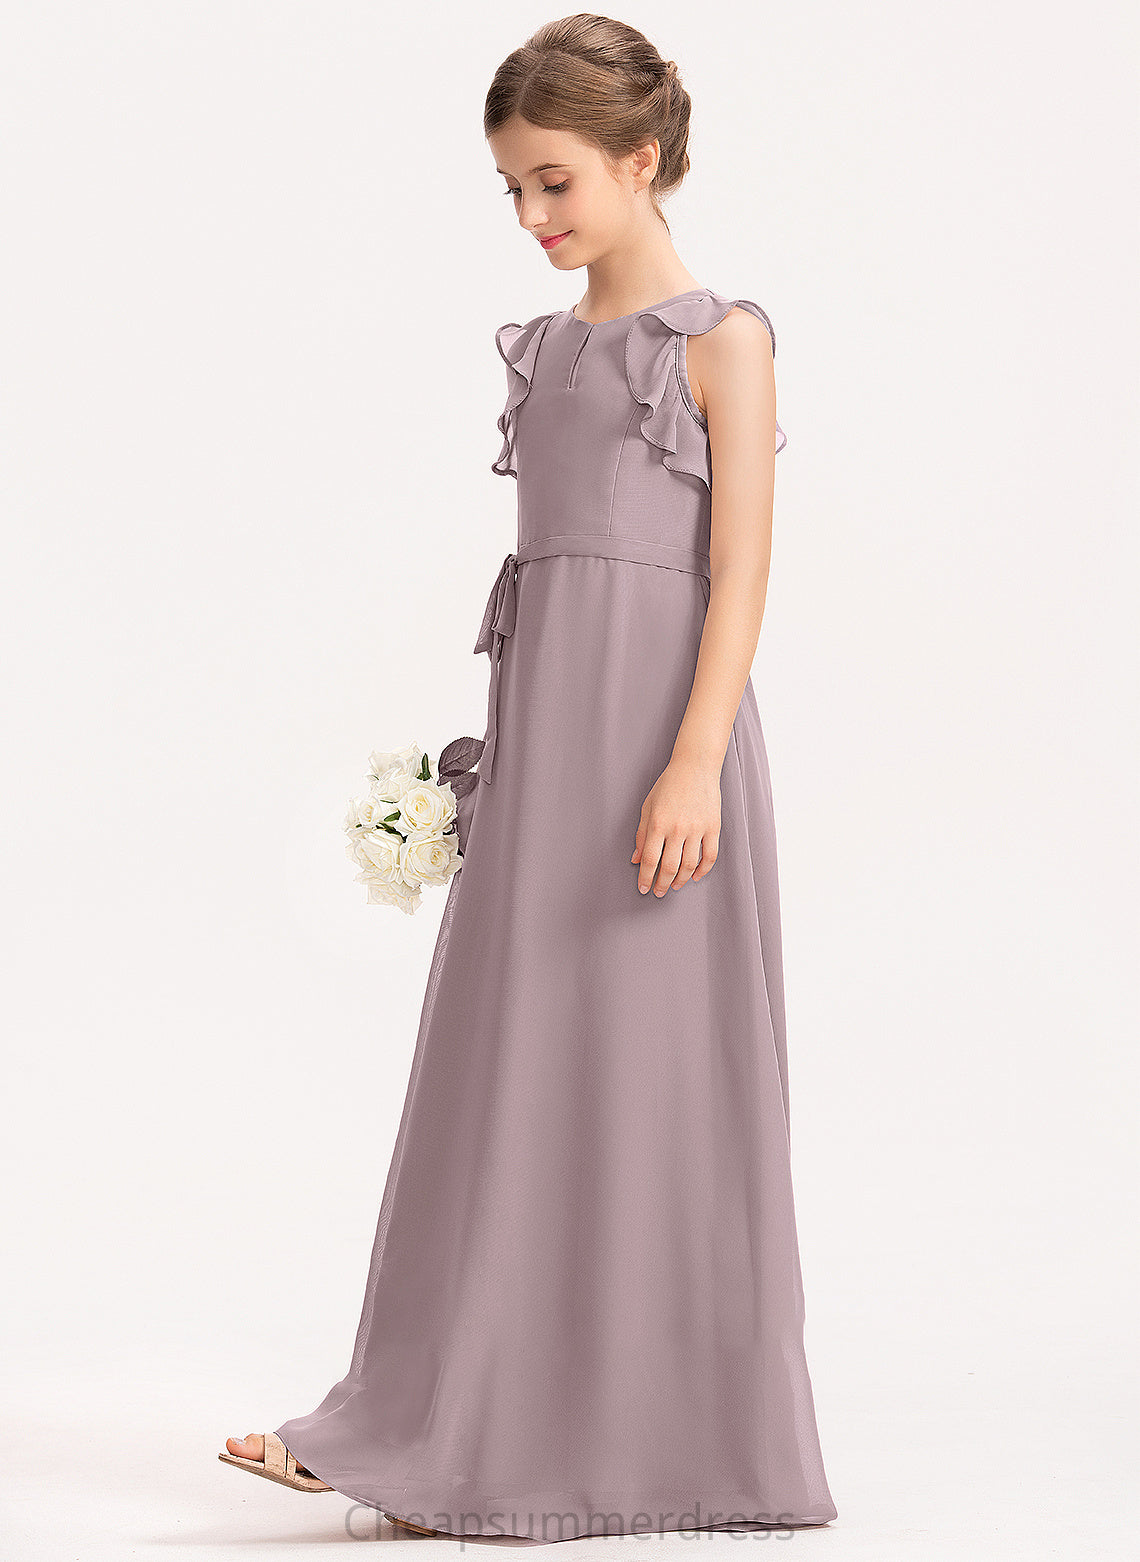 Cascading Junior Bridesmaid Dresses Scoop Bow(s) Chiffon Ruffles With Neck Kinley A-Line Floor-Length